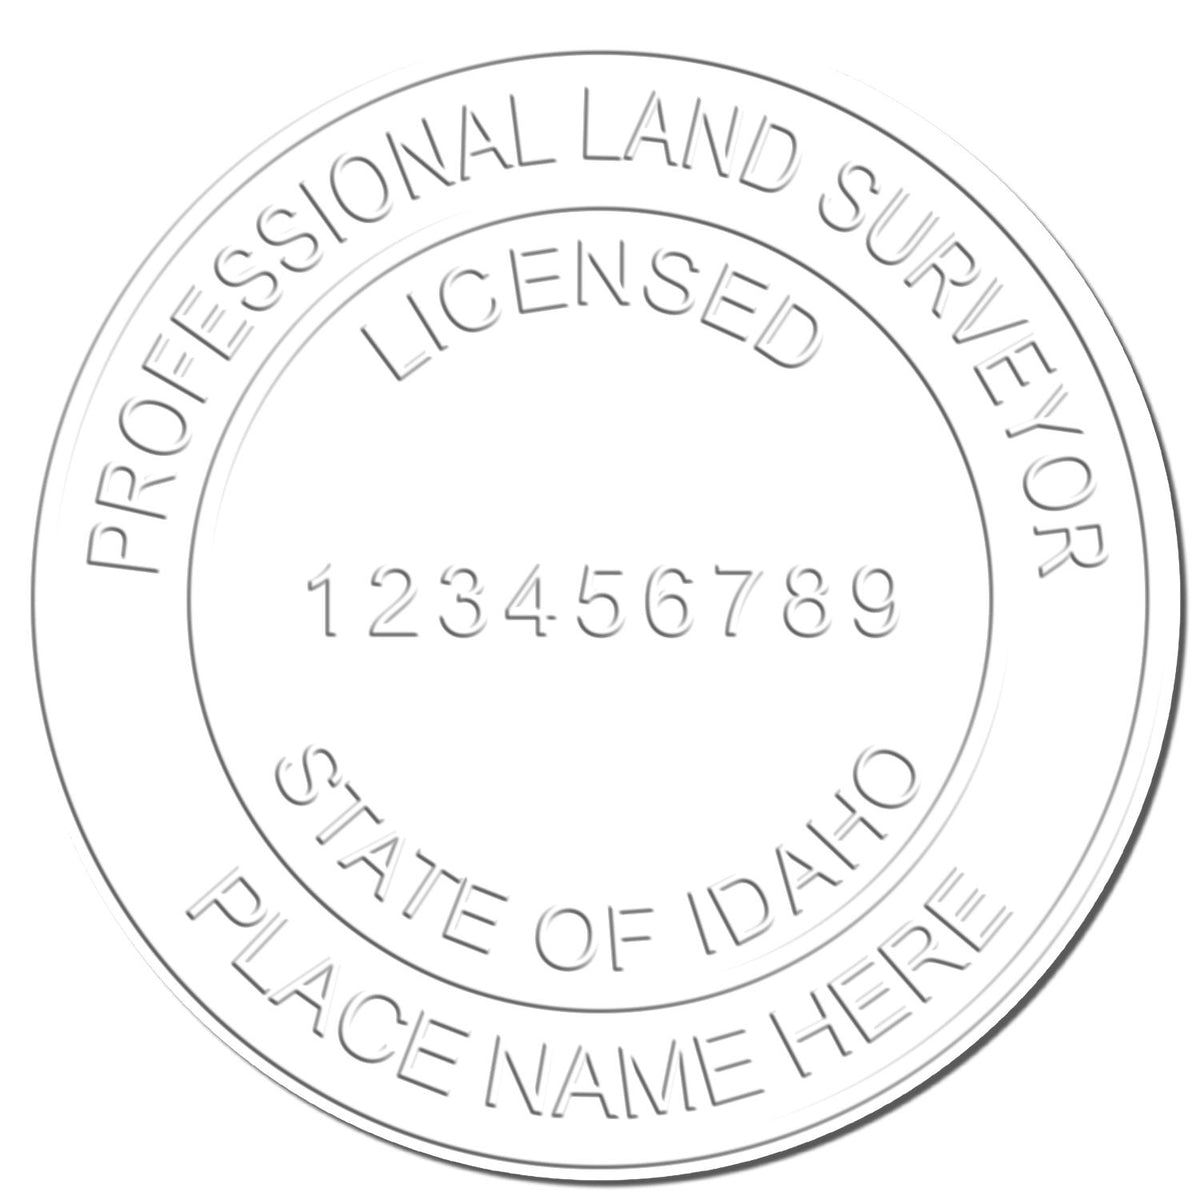 This paper is stamped with a sample imprint of the Handheld Idaho Land Surveyor Seal, signifying its quality and reliability.